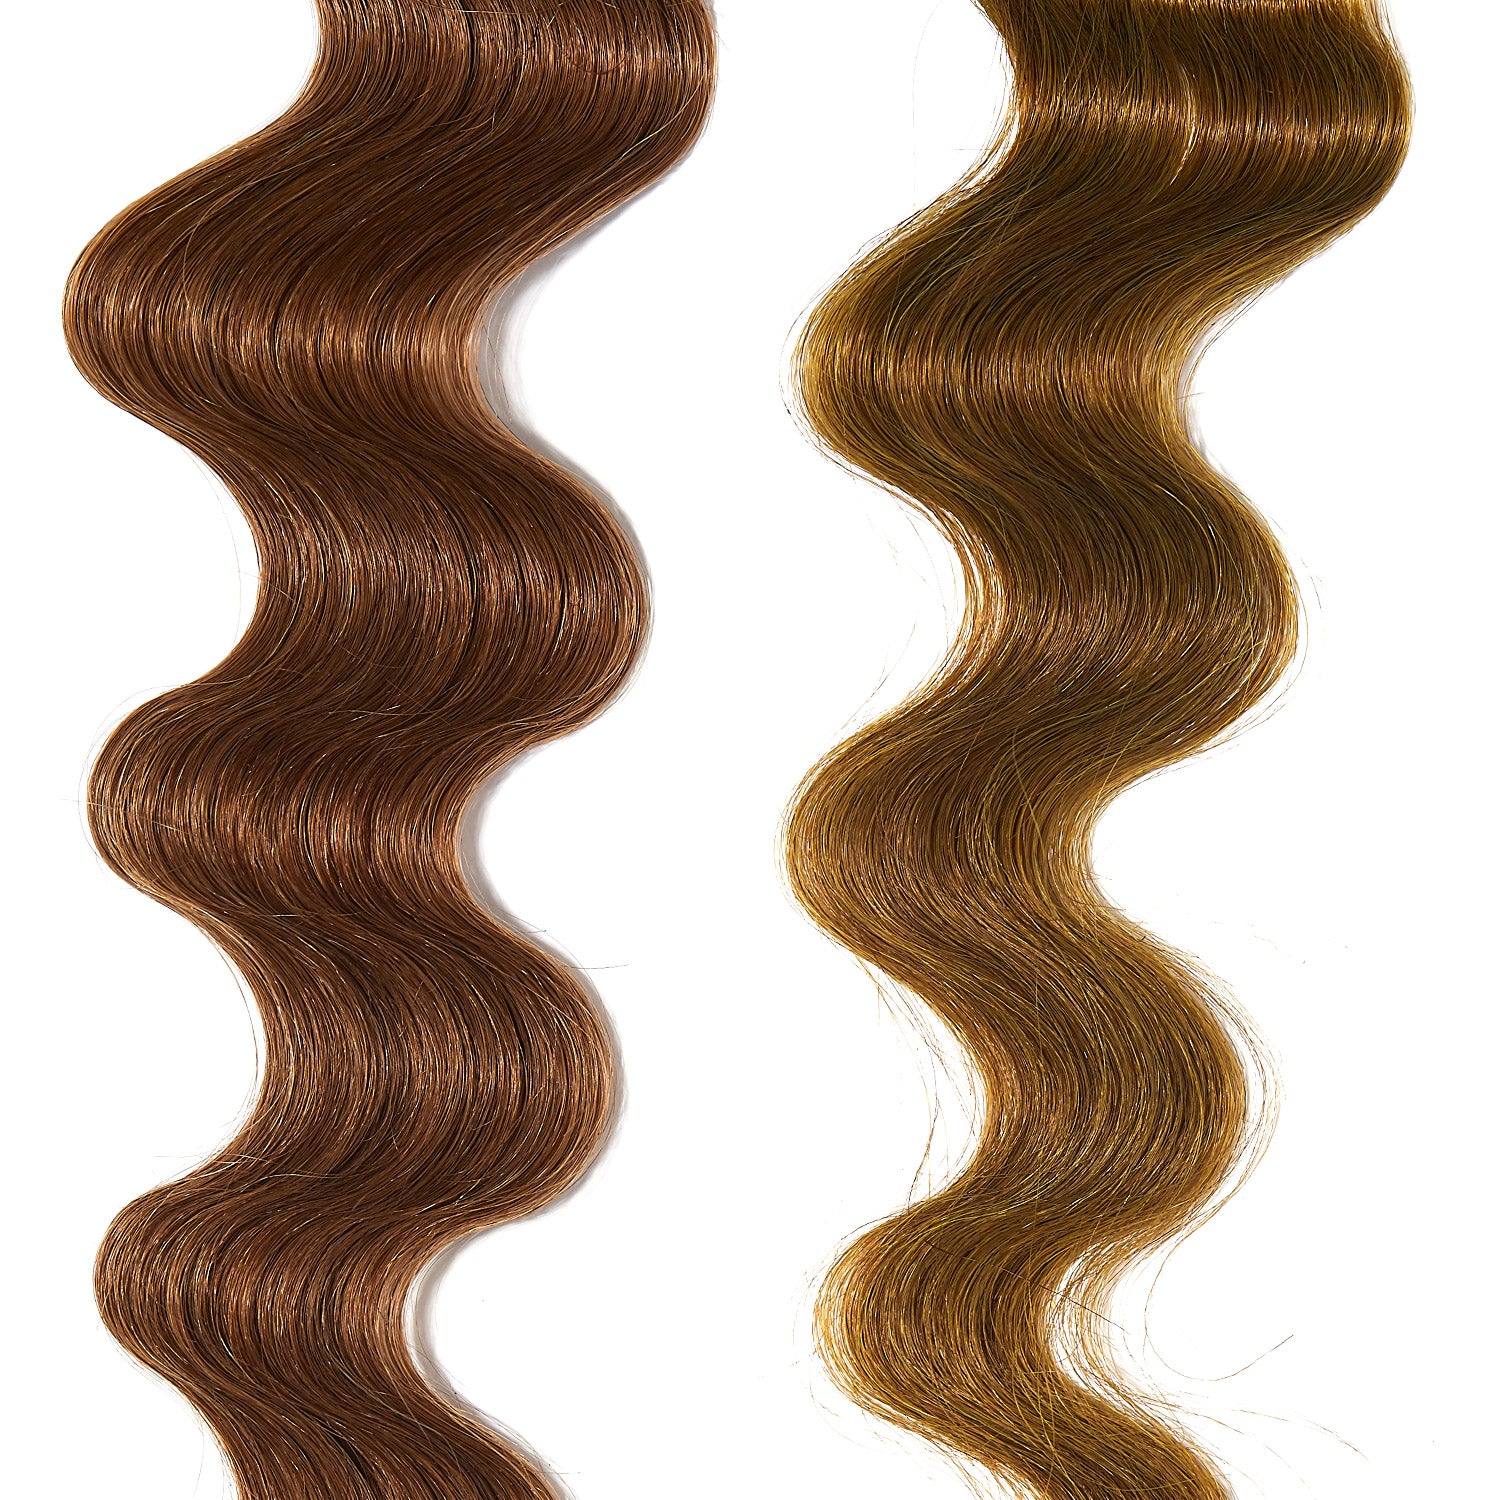 yellow gold hair color on light brown hair